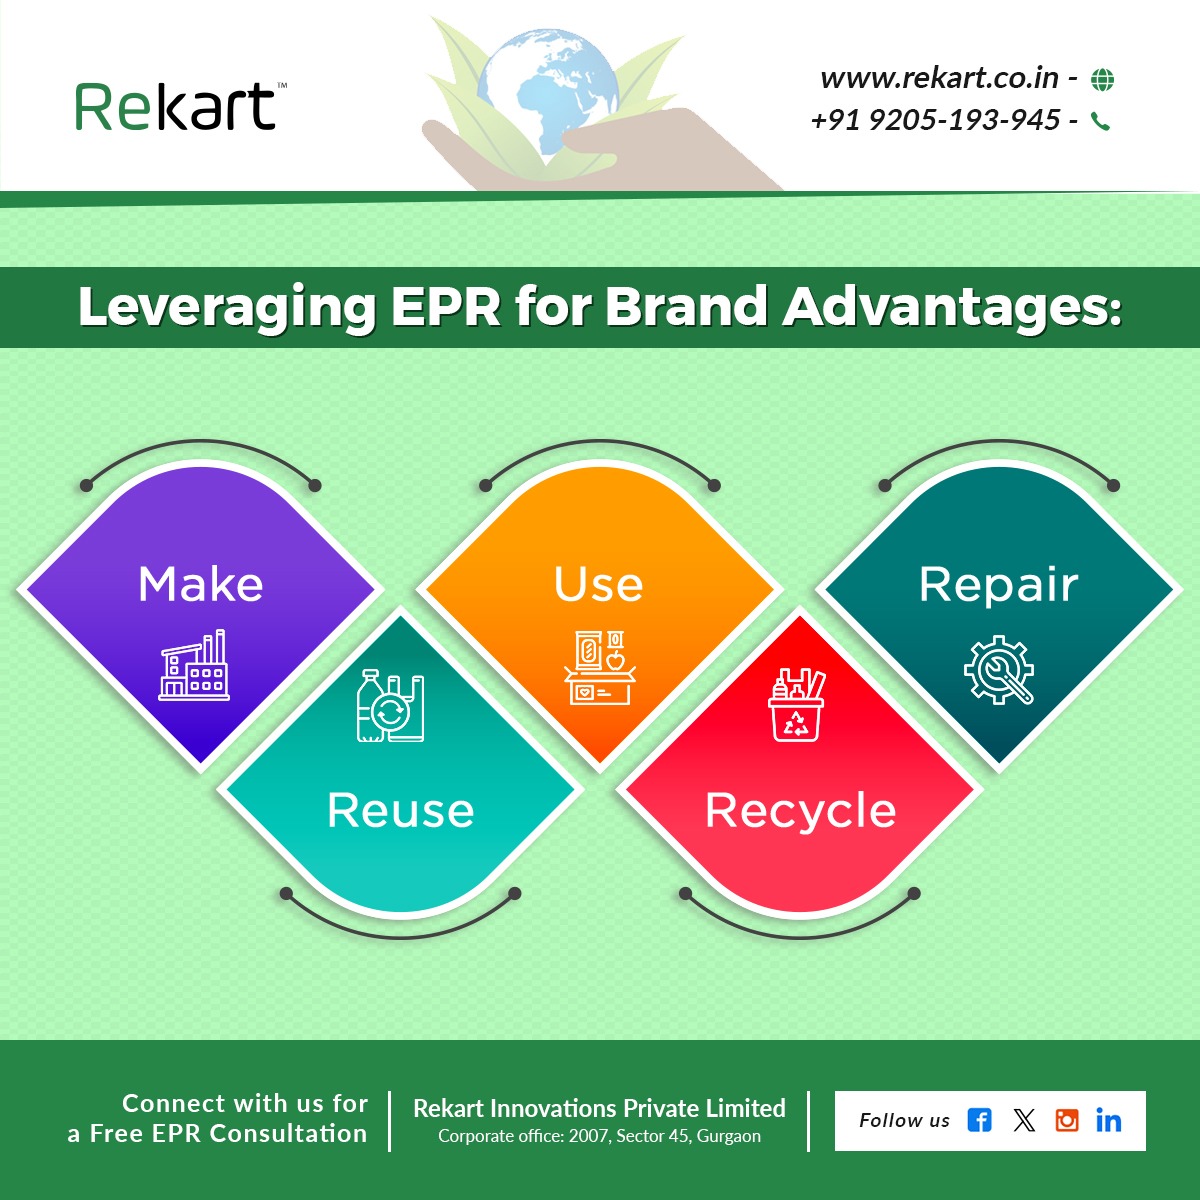 Leveraging #EPRforbrand benefits: Design eco-friendly products, promote responsible usage, offer repair services, facilitate reuse, and establish recycling initiatives.

#SustainableDesign #RepairRevolution #CircularEconomy #WasteReduction #BrandSustainability #RekartInnovations